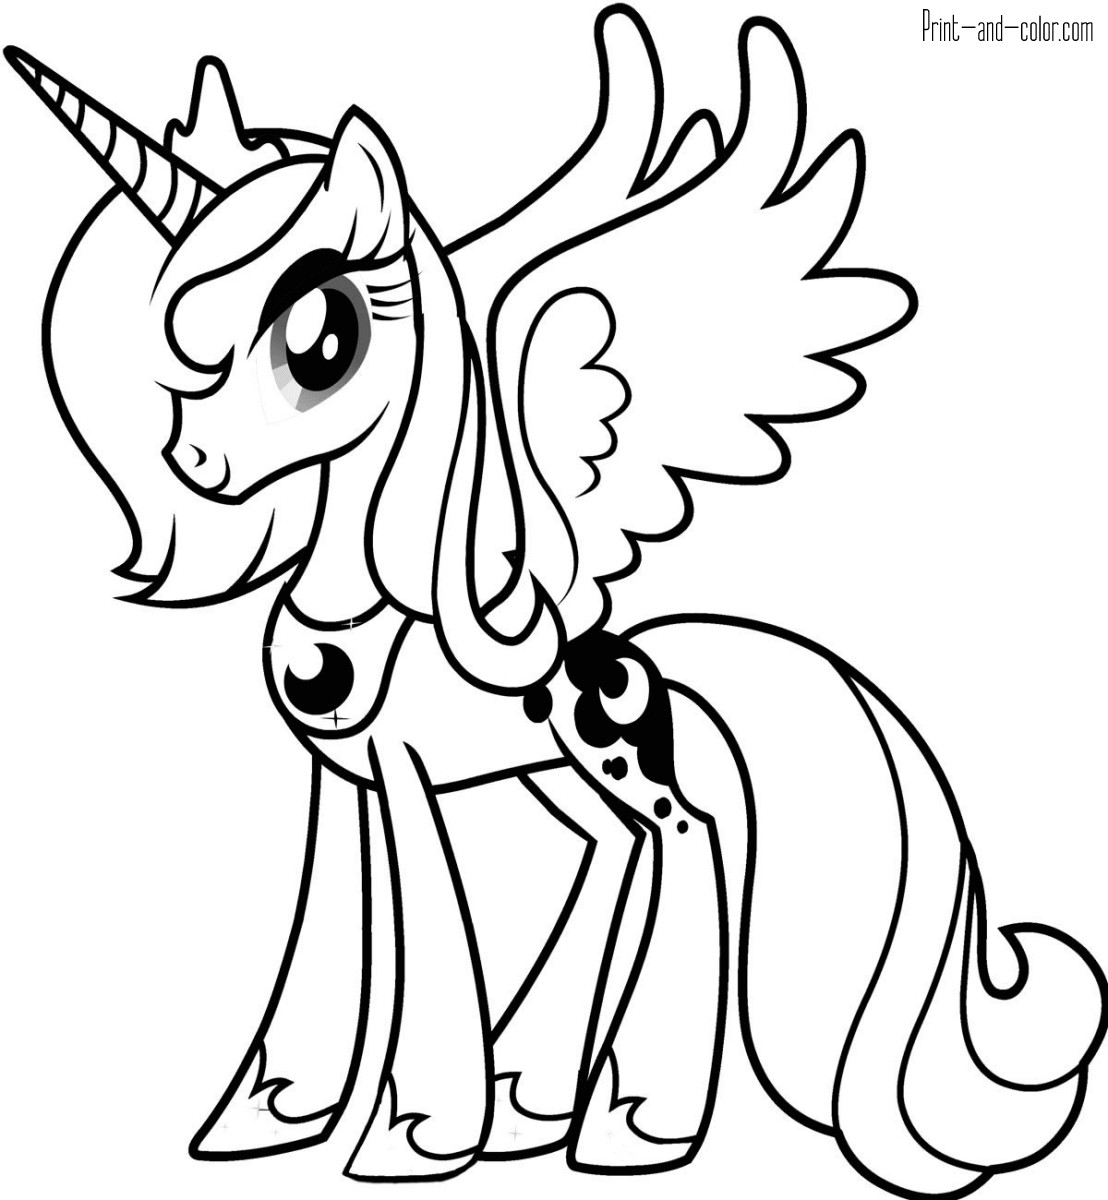 Pony Printable Coloring Pages
 My Little Pony coloring pages